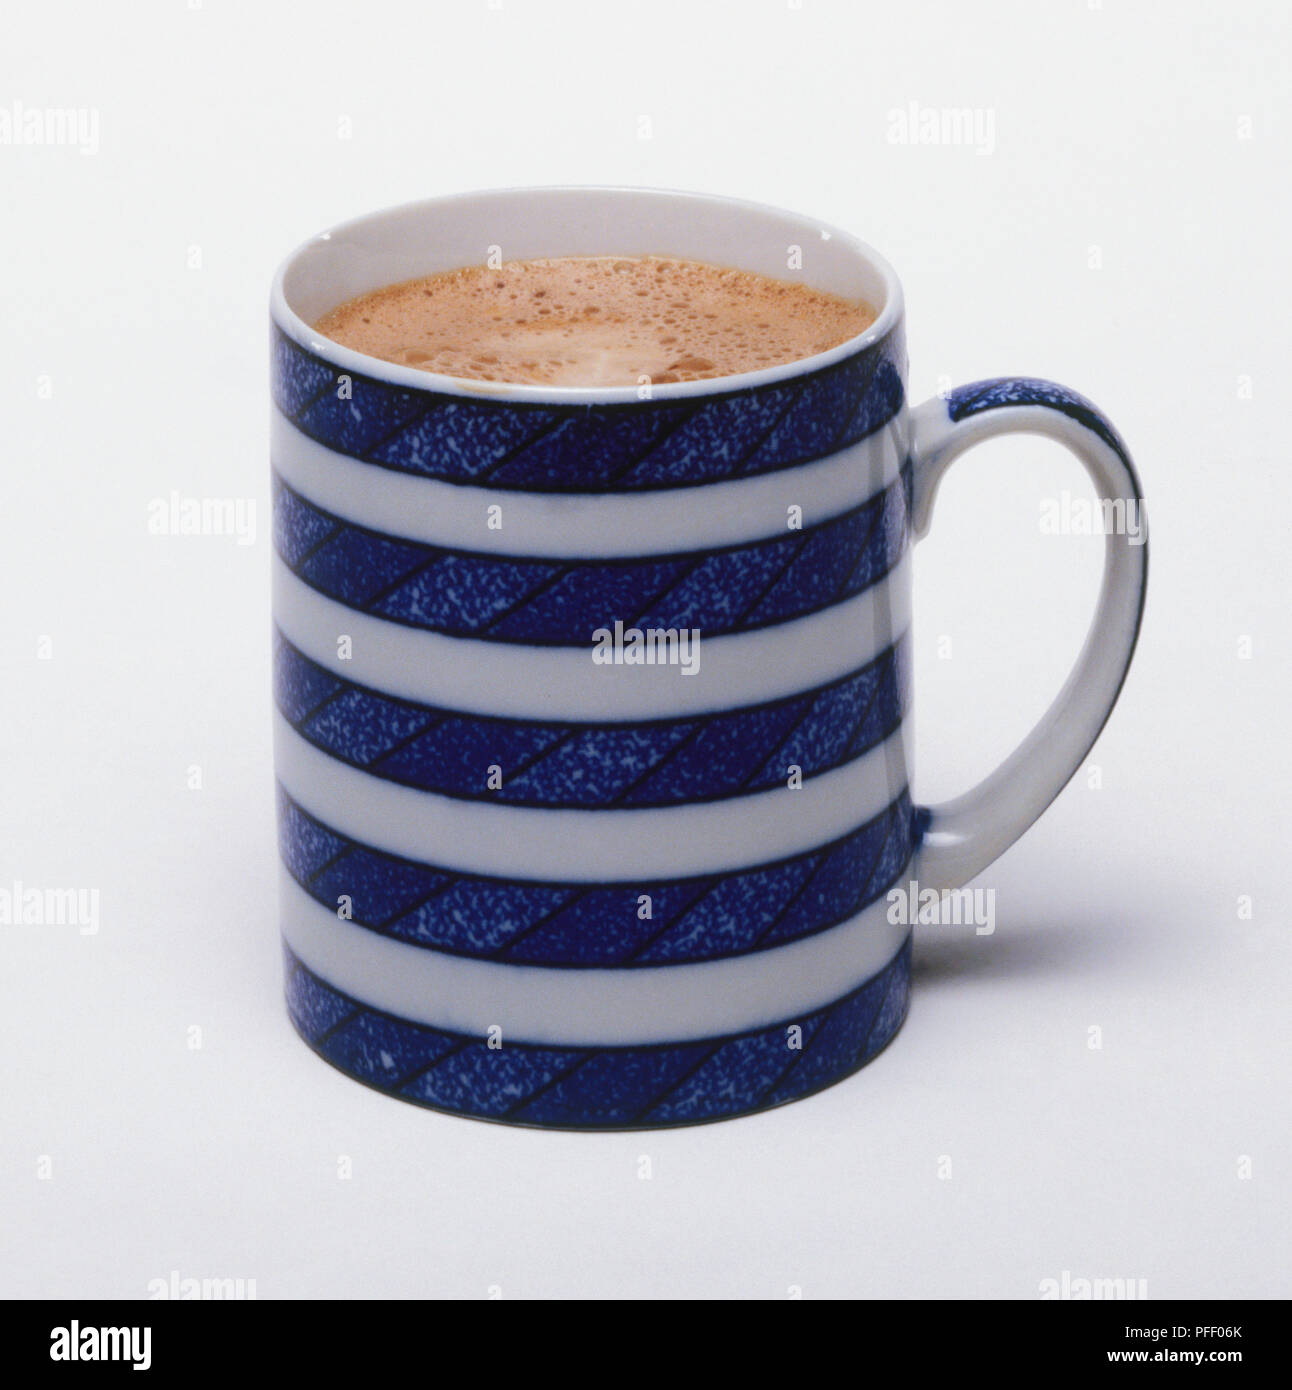 Hot chocolate in blue and white striped mug Stock Photo